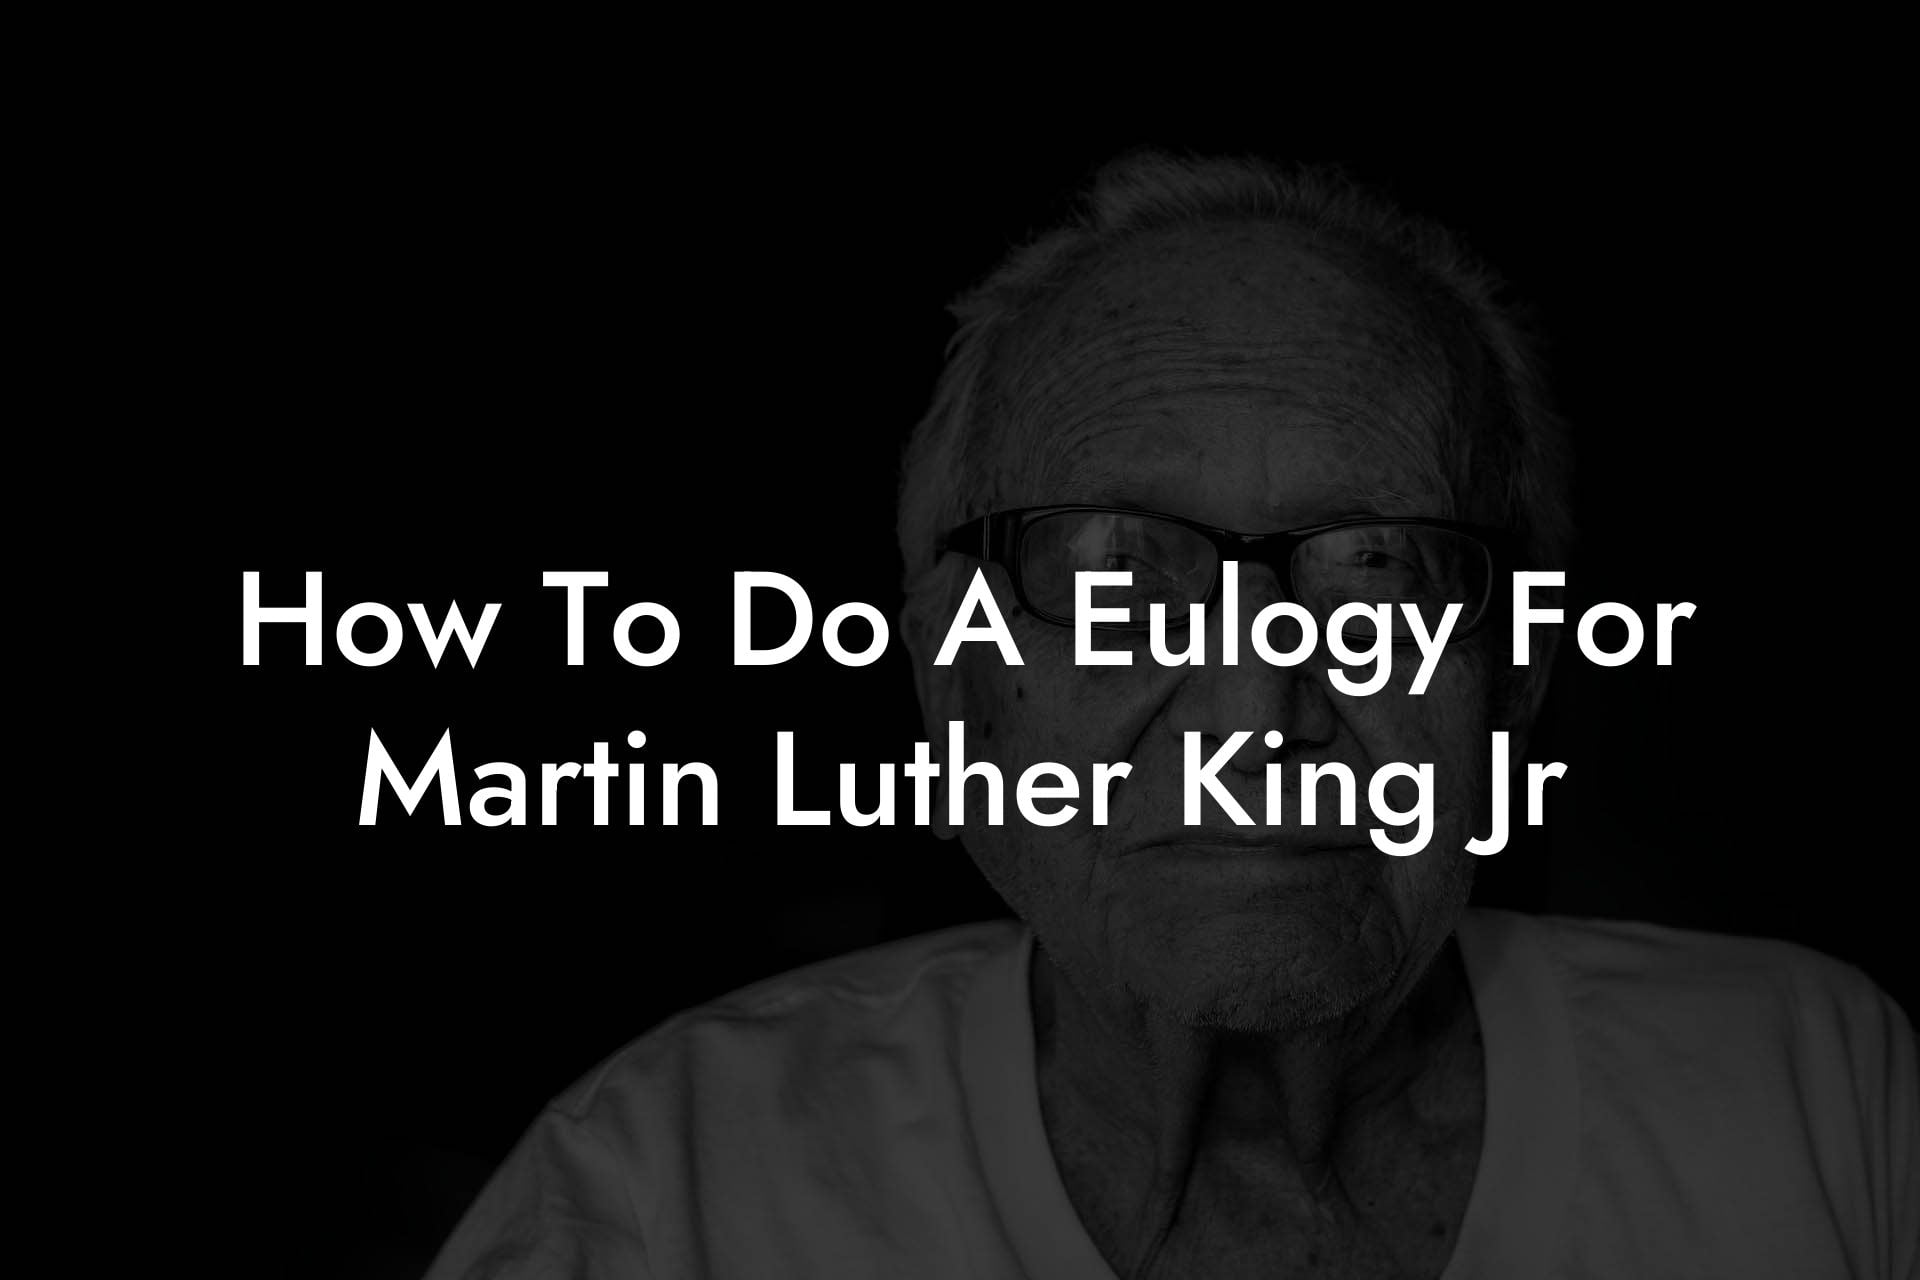 How To Do A Eulogy For Martin Luther King Jr